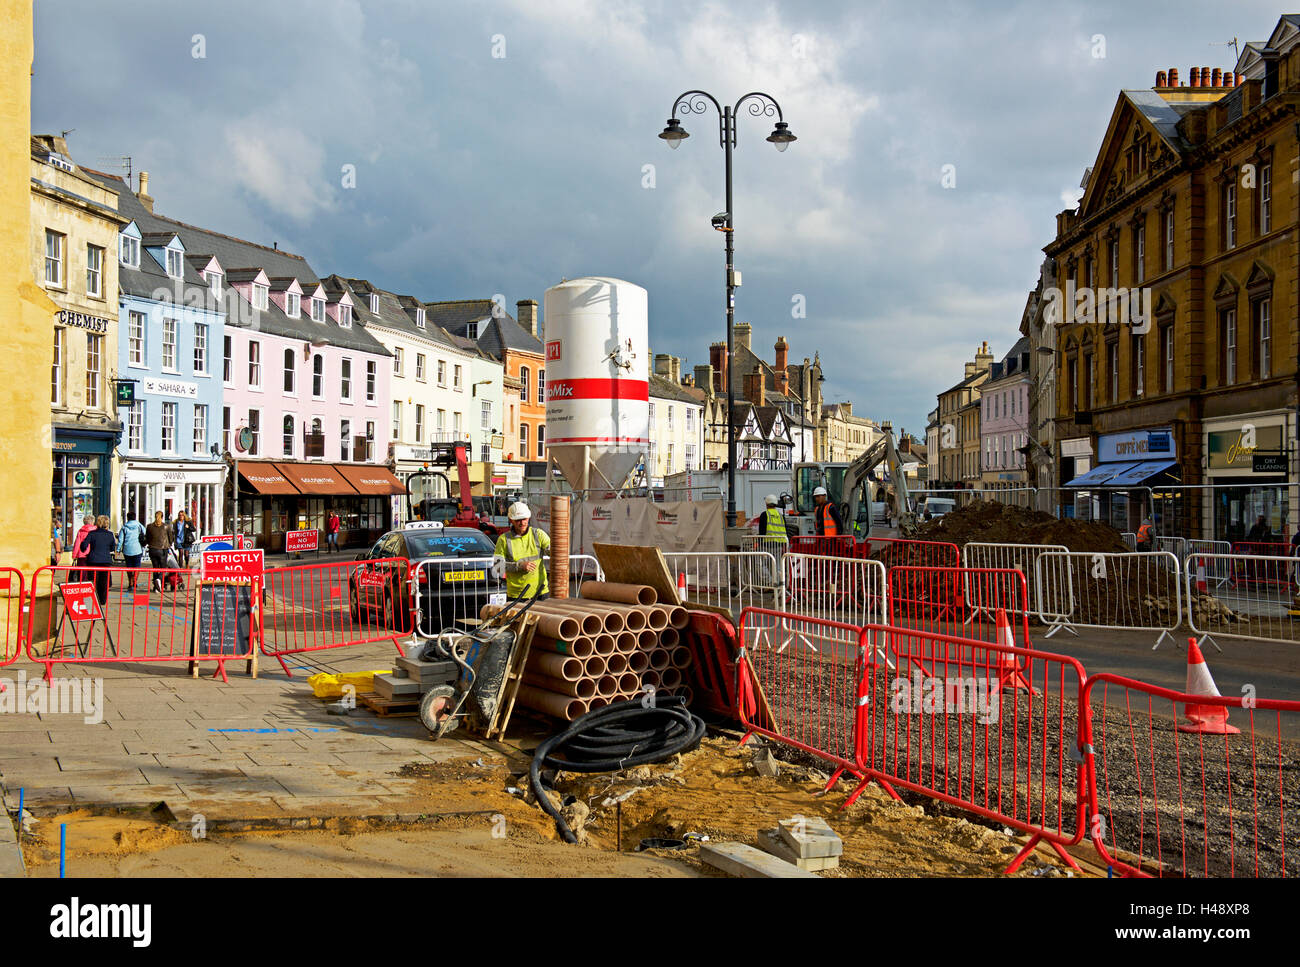 Repaving work going on in Cirencester, Gloucester, England UK Stock Photo